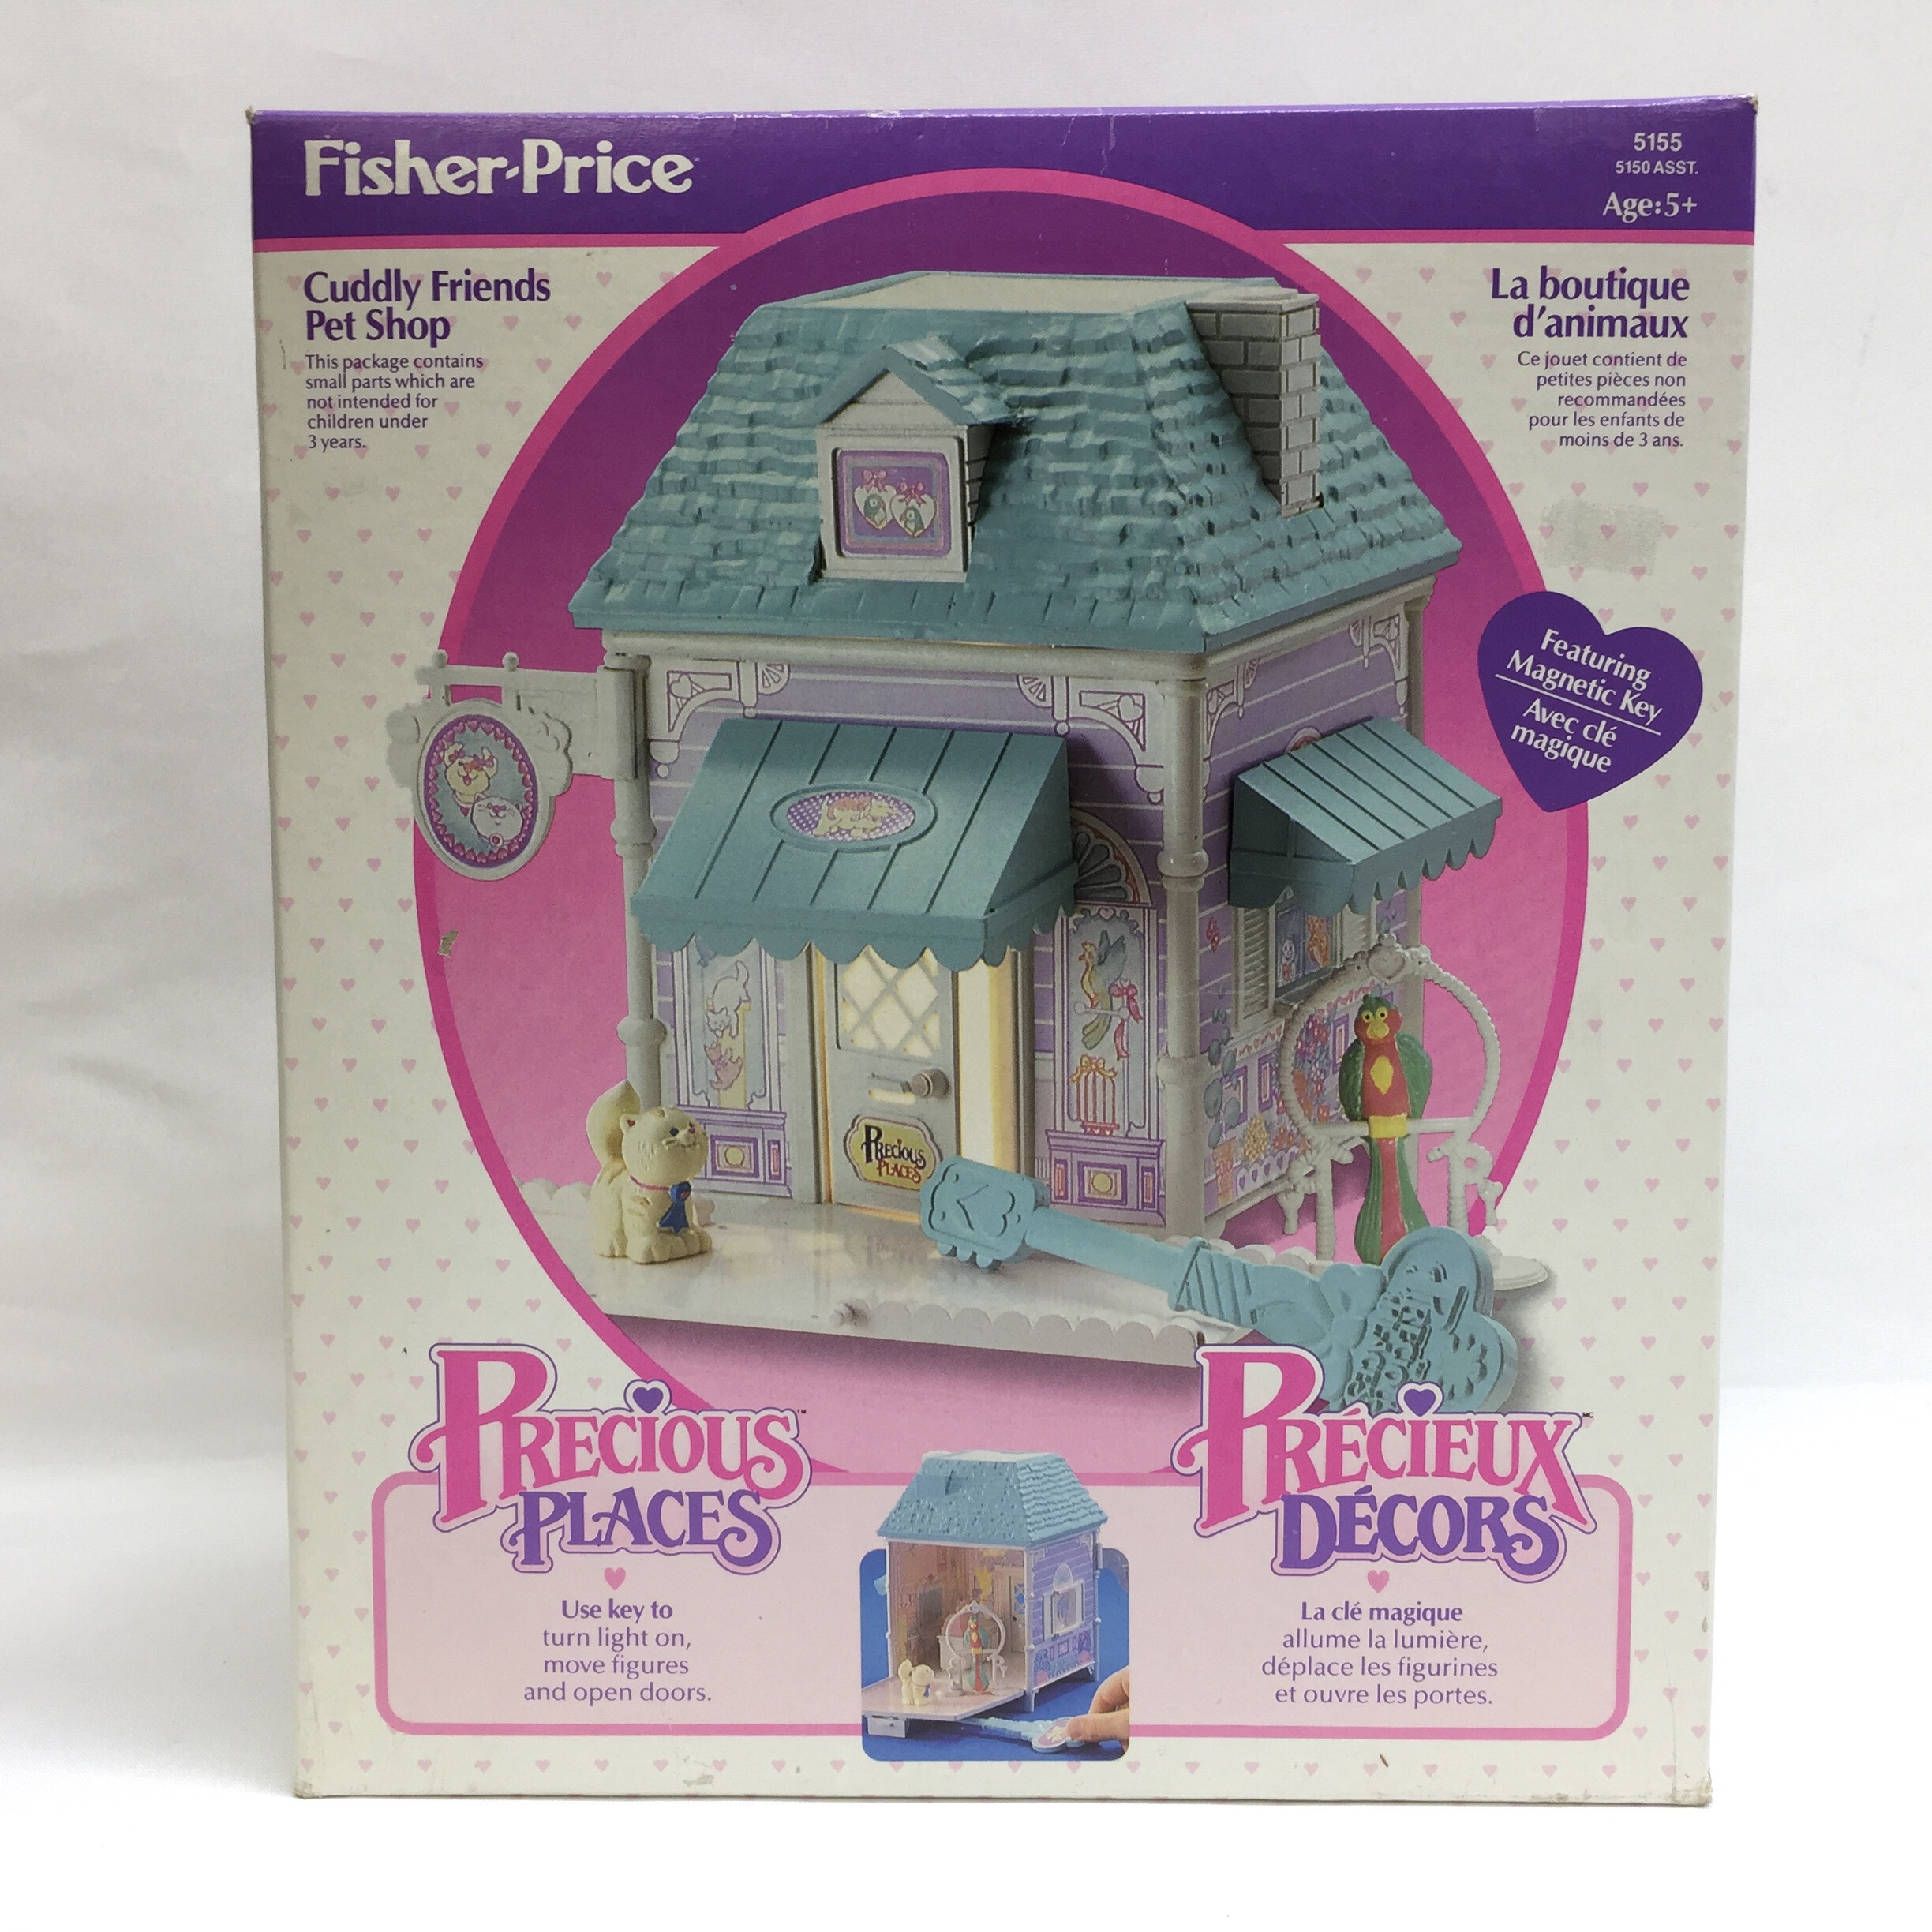 Vintage Fisher-Price Precious Places Cuddly Friends Pet Shop Playset Mint in Box 